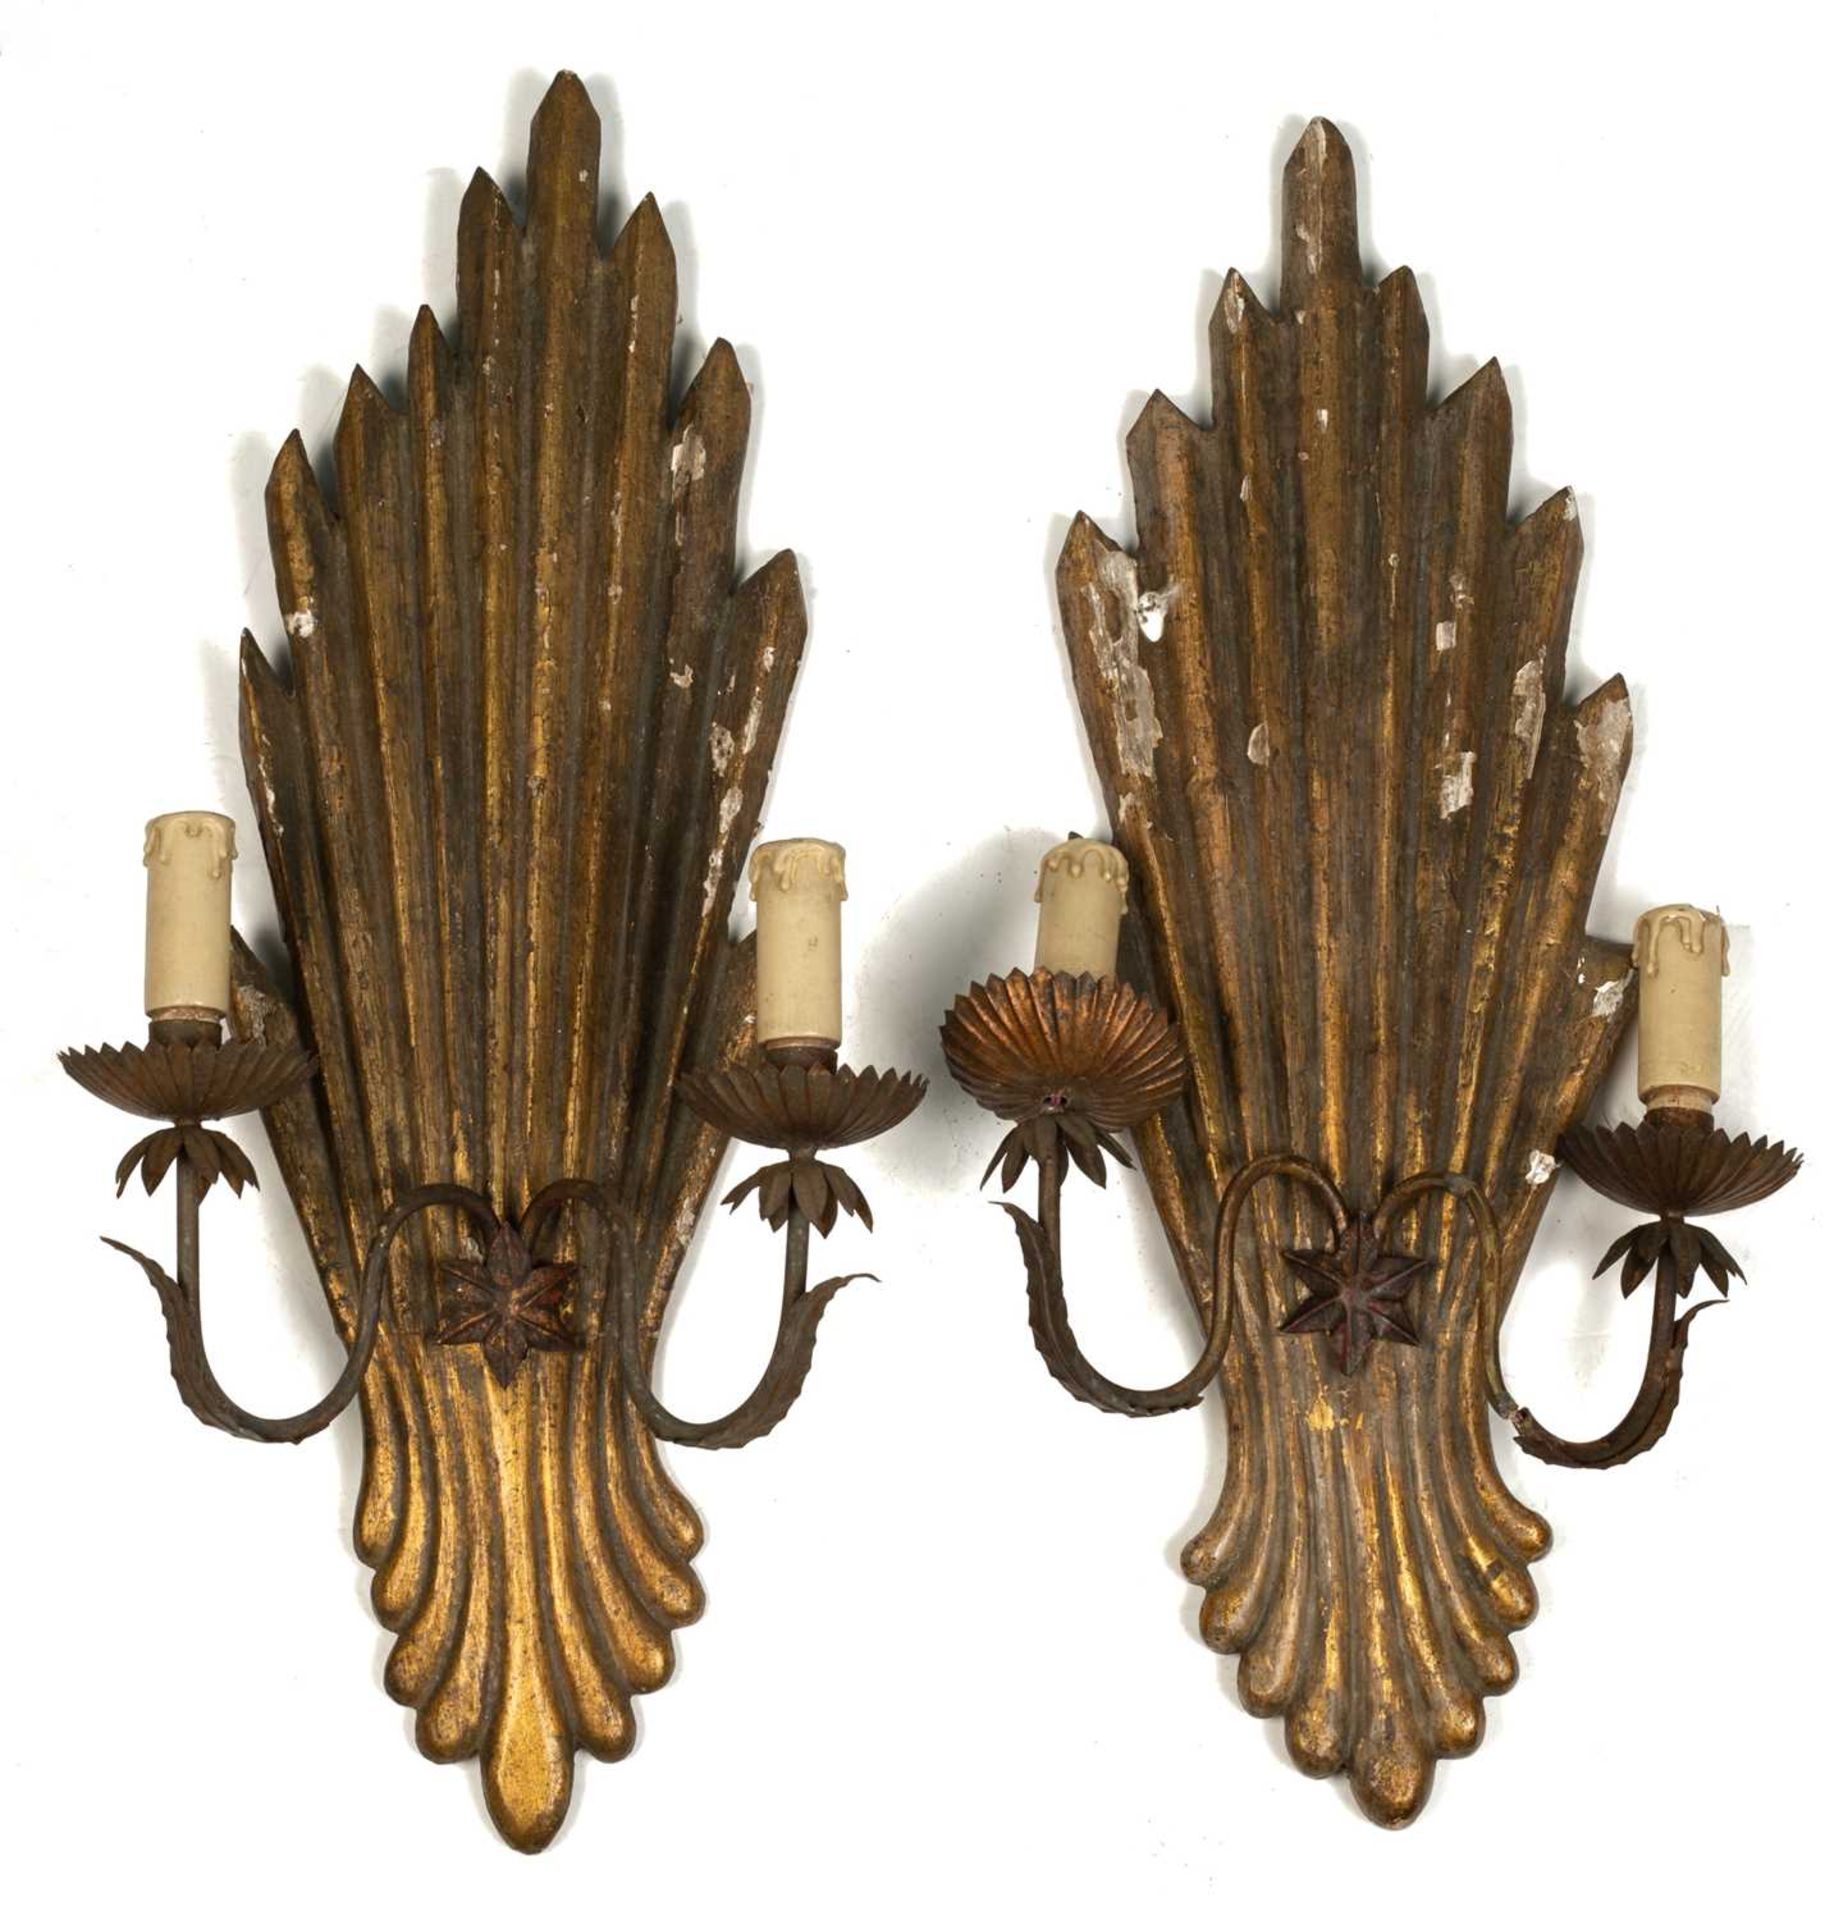 A pair or 18th century style giltwood wall appliques